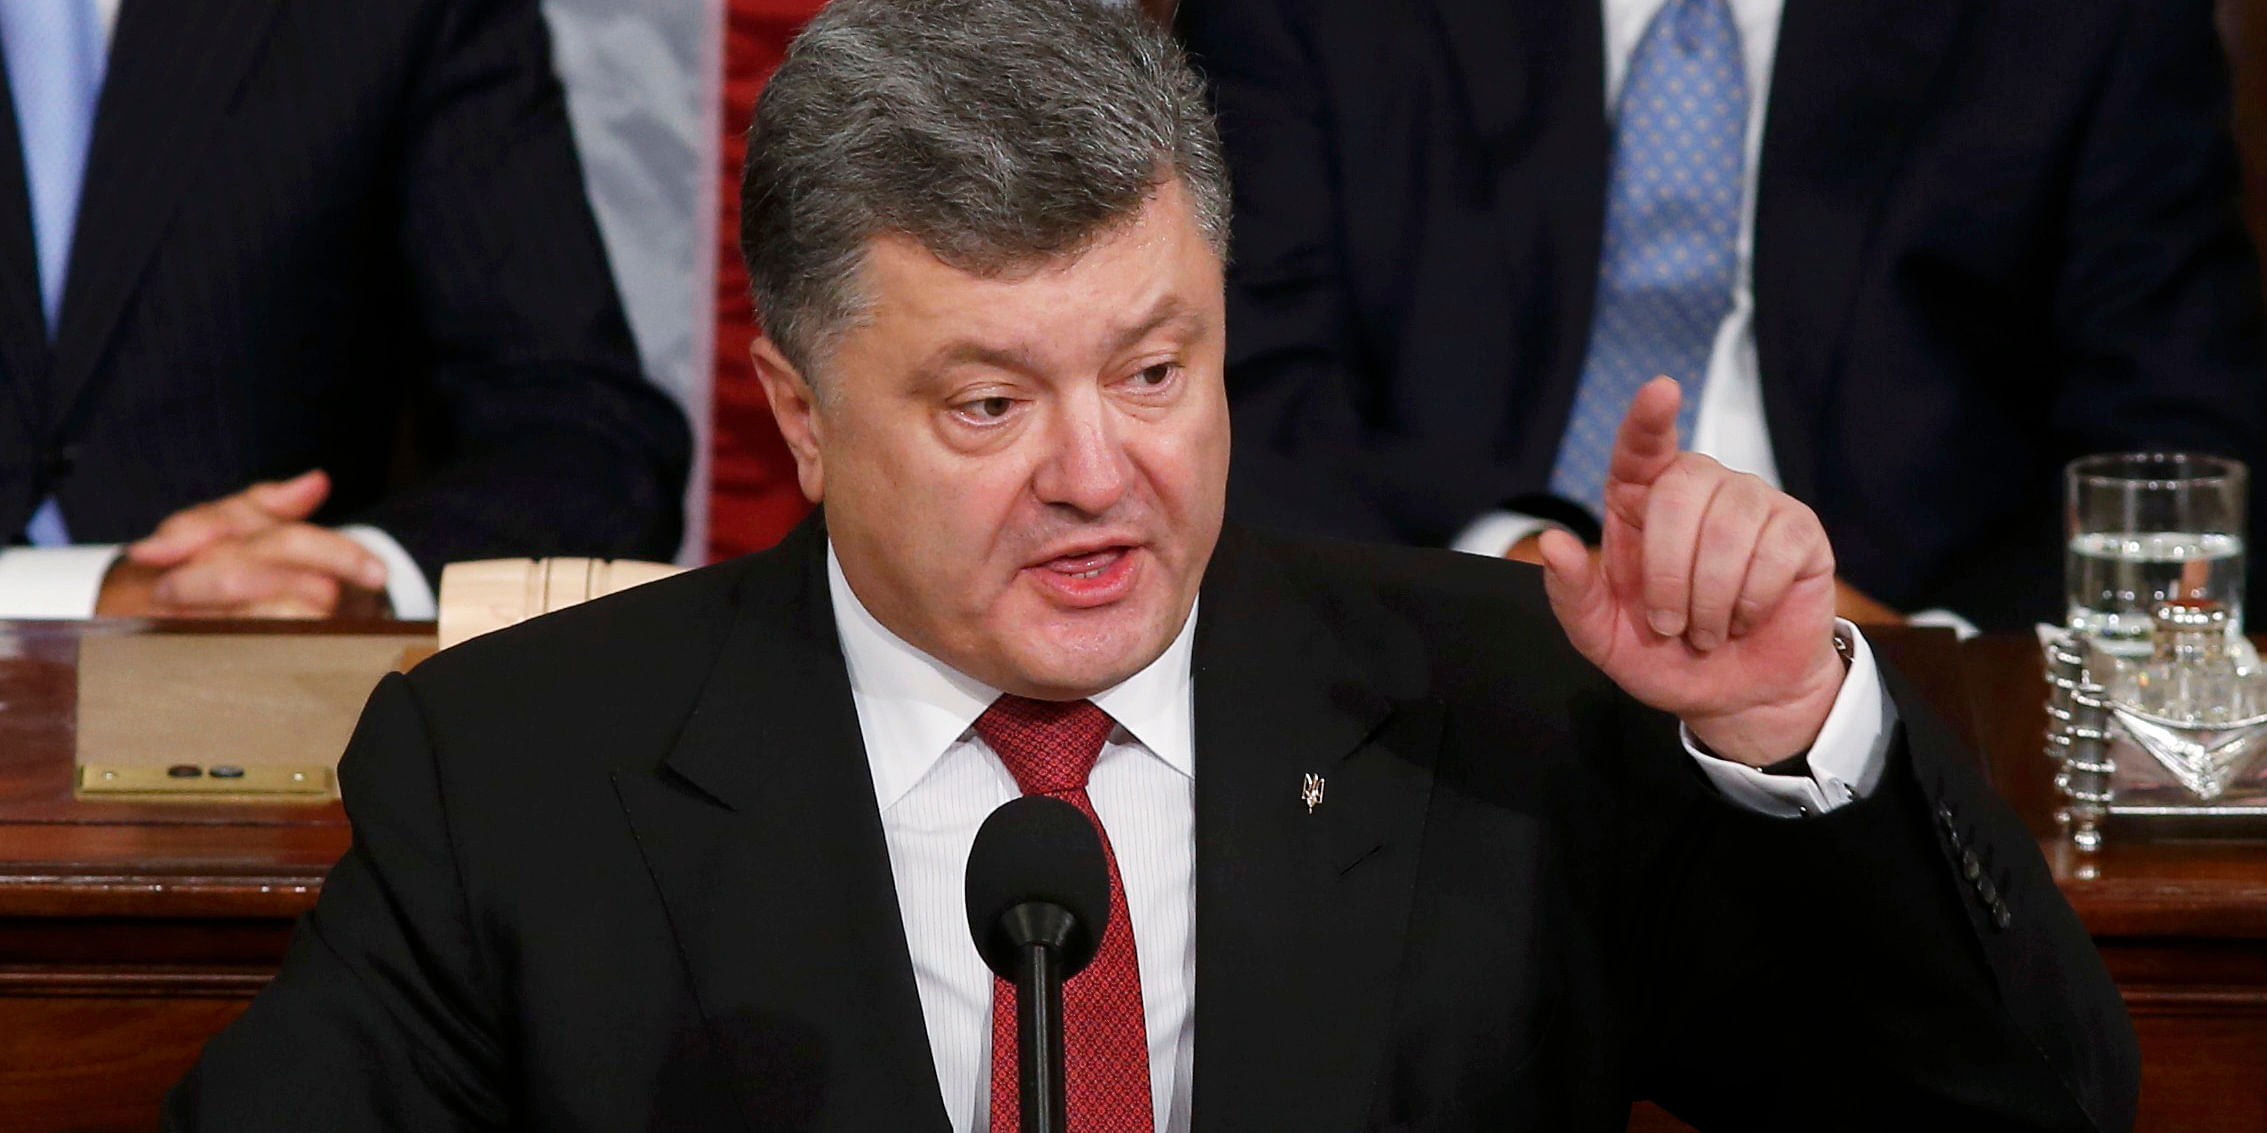 Ukraine President Petro Poroshenko gestures while addressing a joint meeting of Congress in the US Capitol in Washington, September 18, 2014. Photo: Reuters